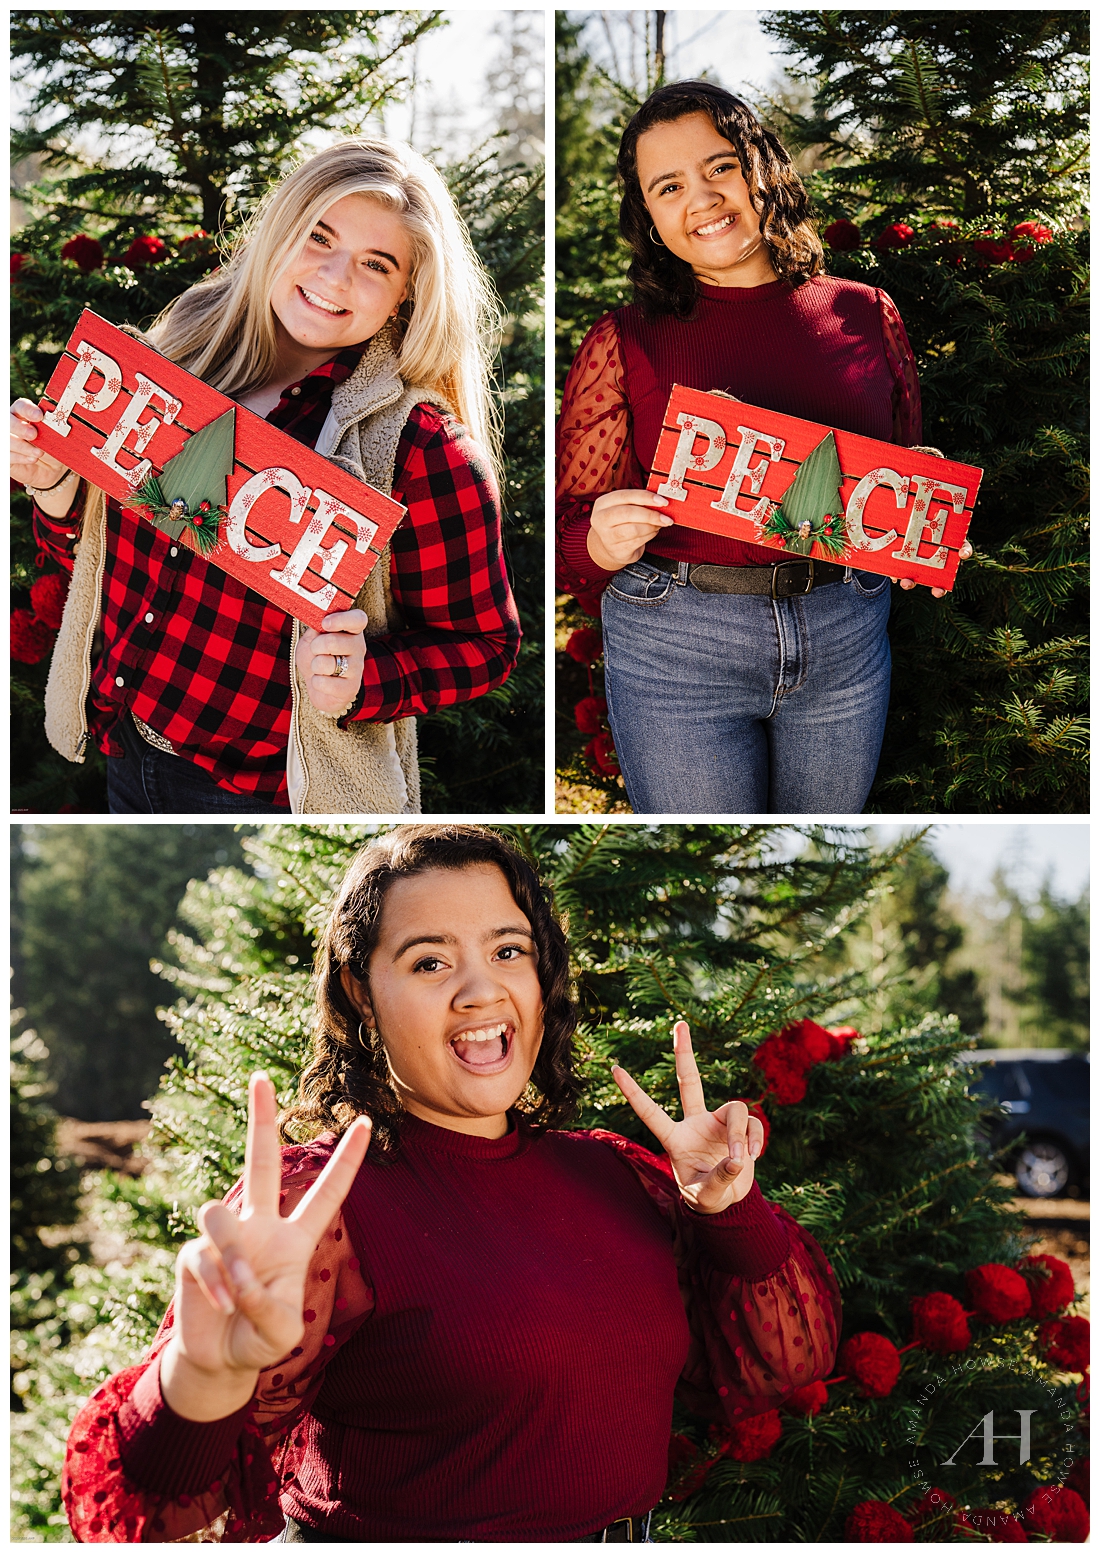 How to pose with signs and props for themed portraits | the AHP Model Team held up festive Peace signs for this themed portrait session at Wreath Works Tree Farm in Port Orchard | Photographed by Tacoma Senior Portrait Photographer Amanda Howse